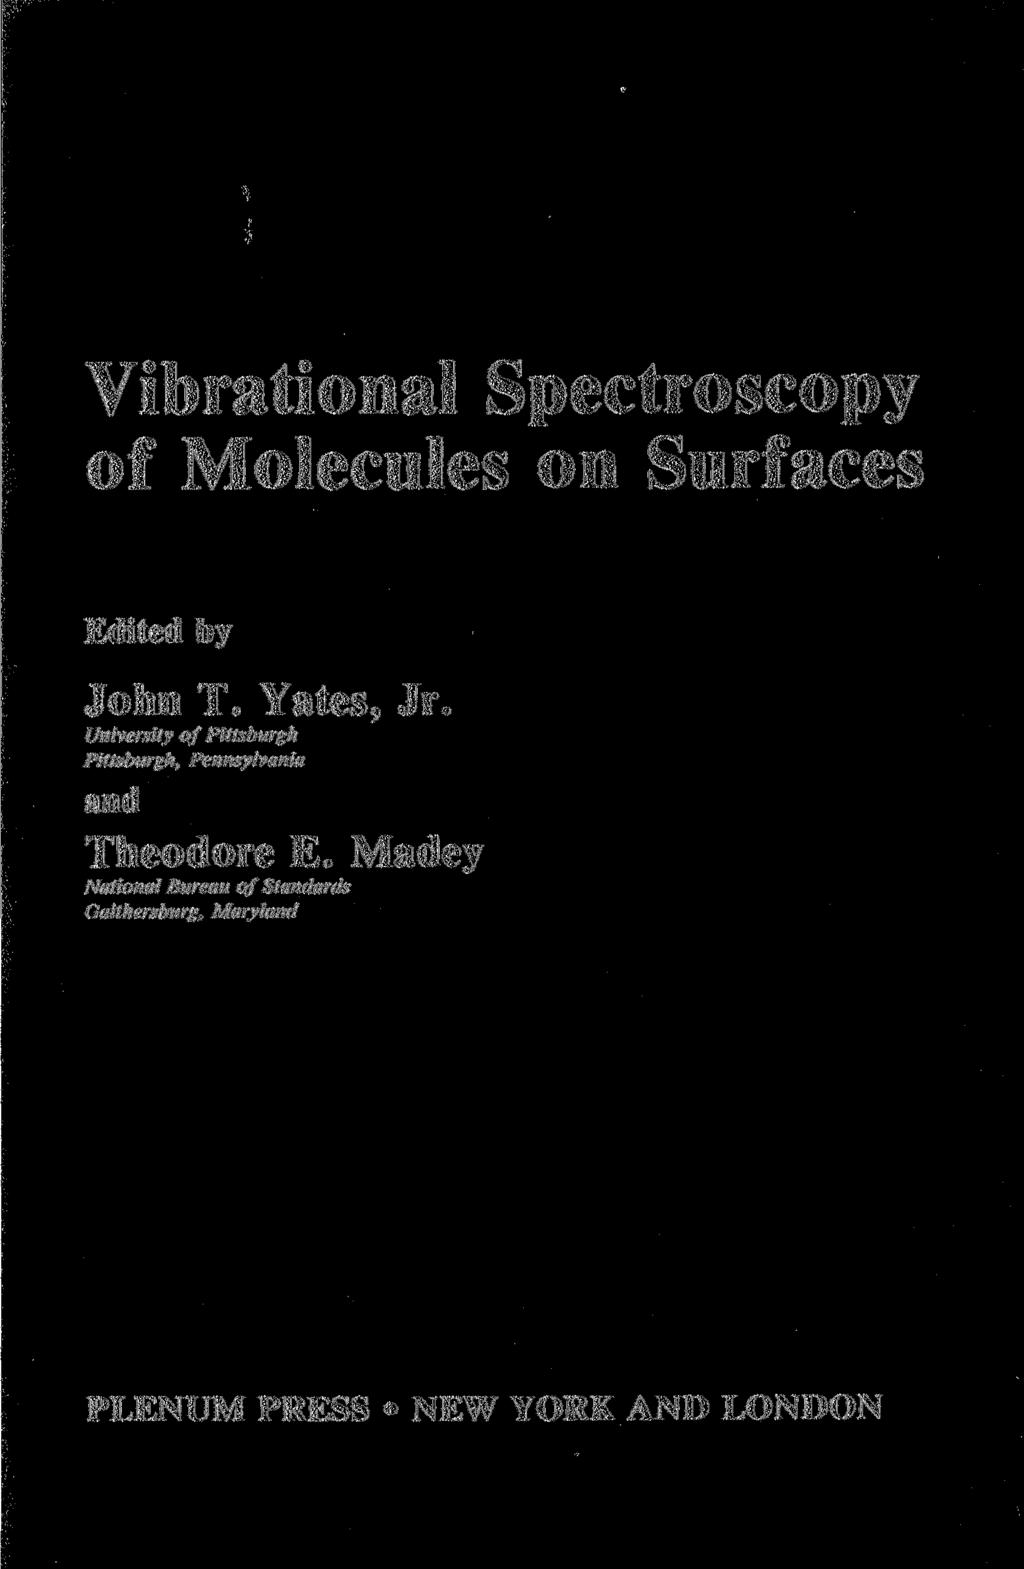 Vibrational Spectroscopy of Molecules on Surfaces Edited by John T. Yates, Jr.